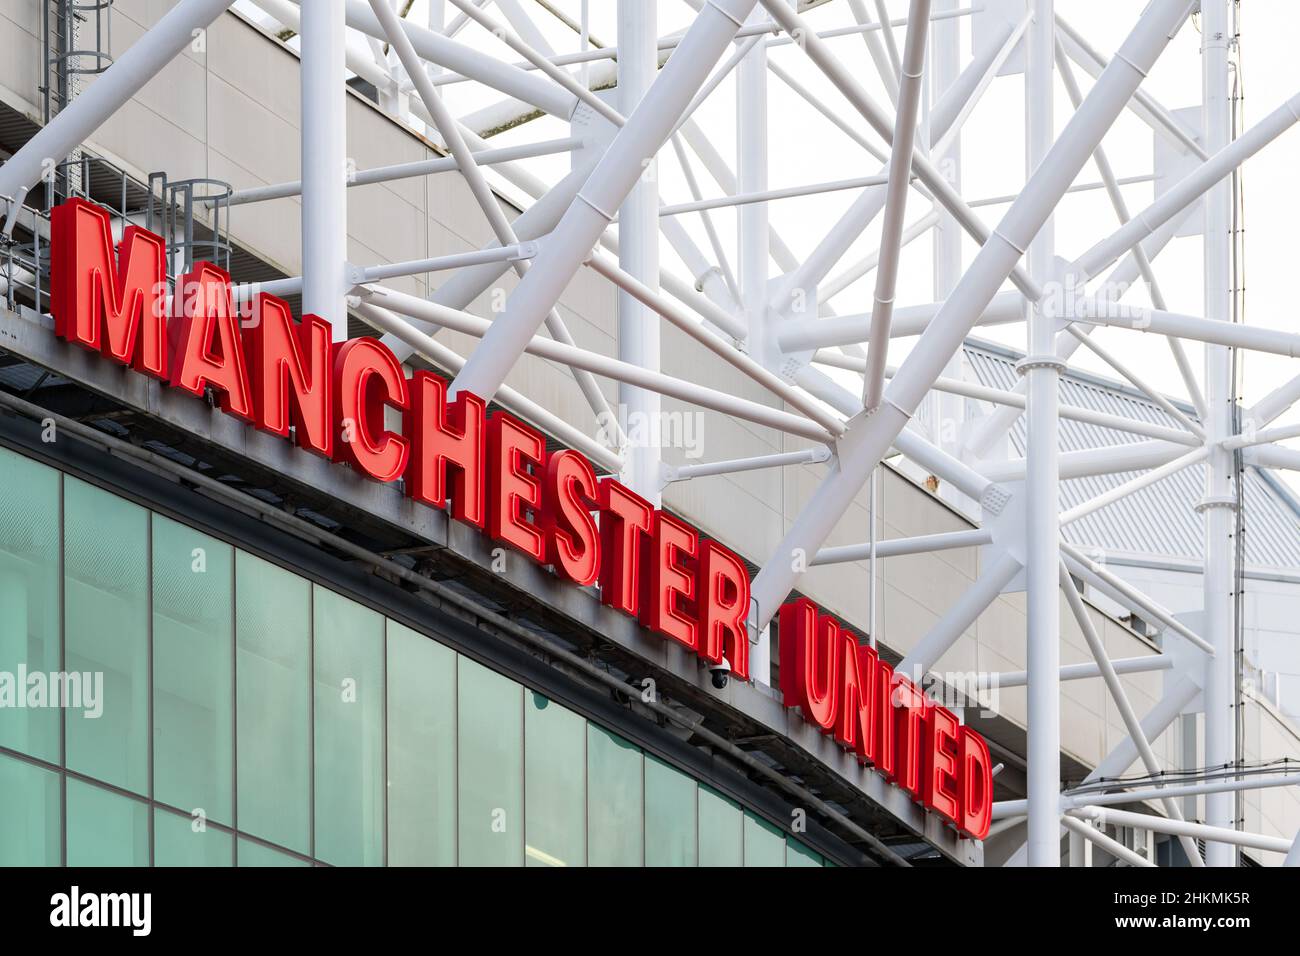 Old Trafford football ground, home to Manchester United FC. Stock Photo